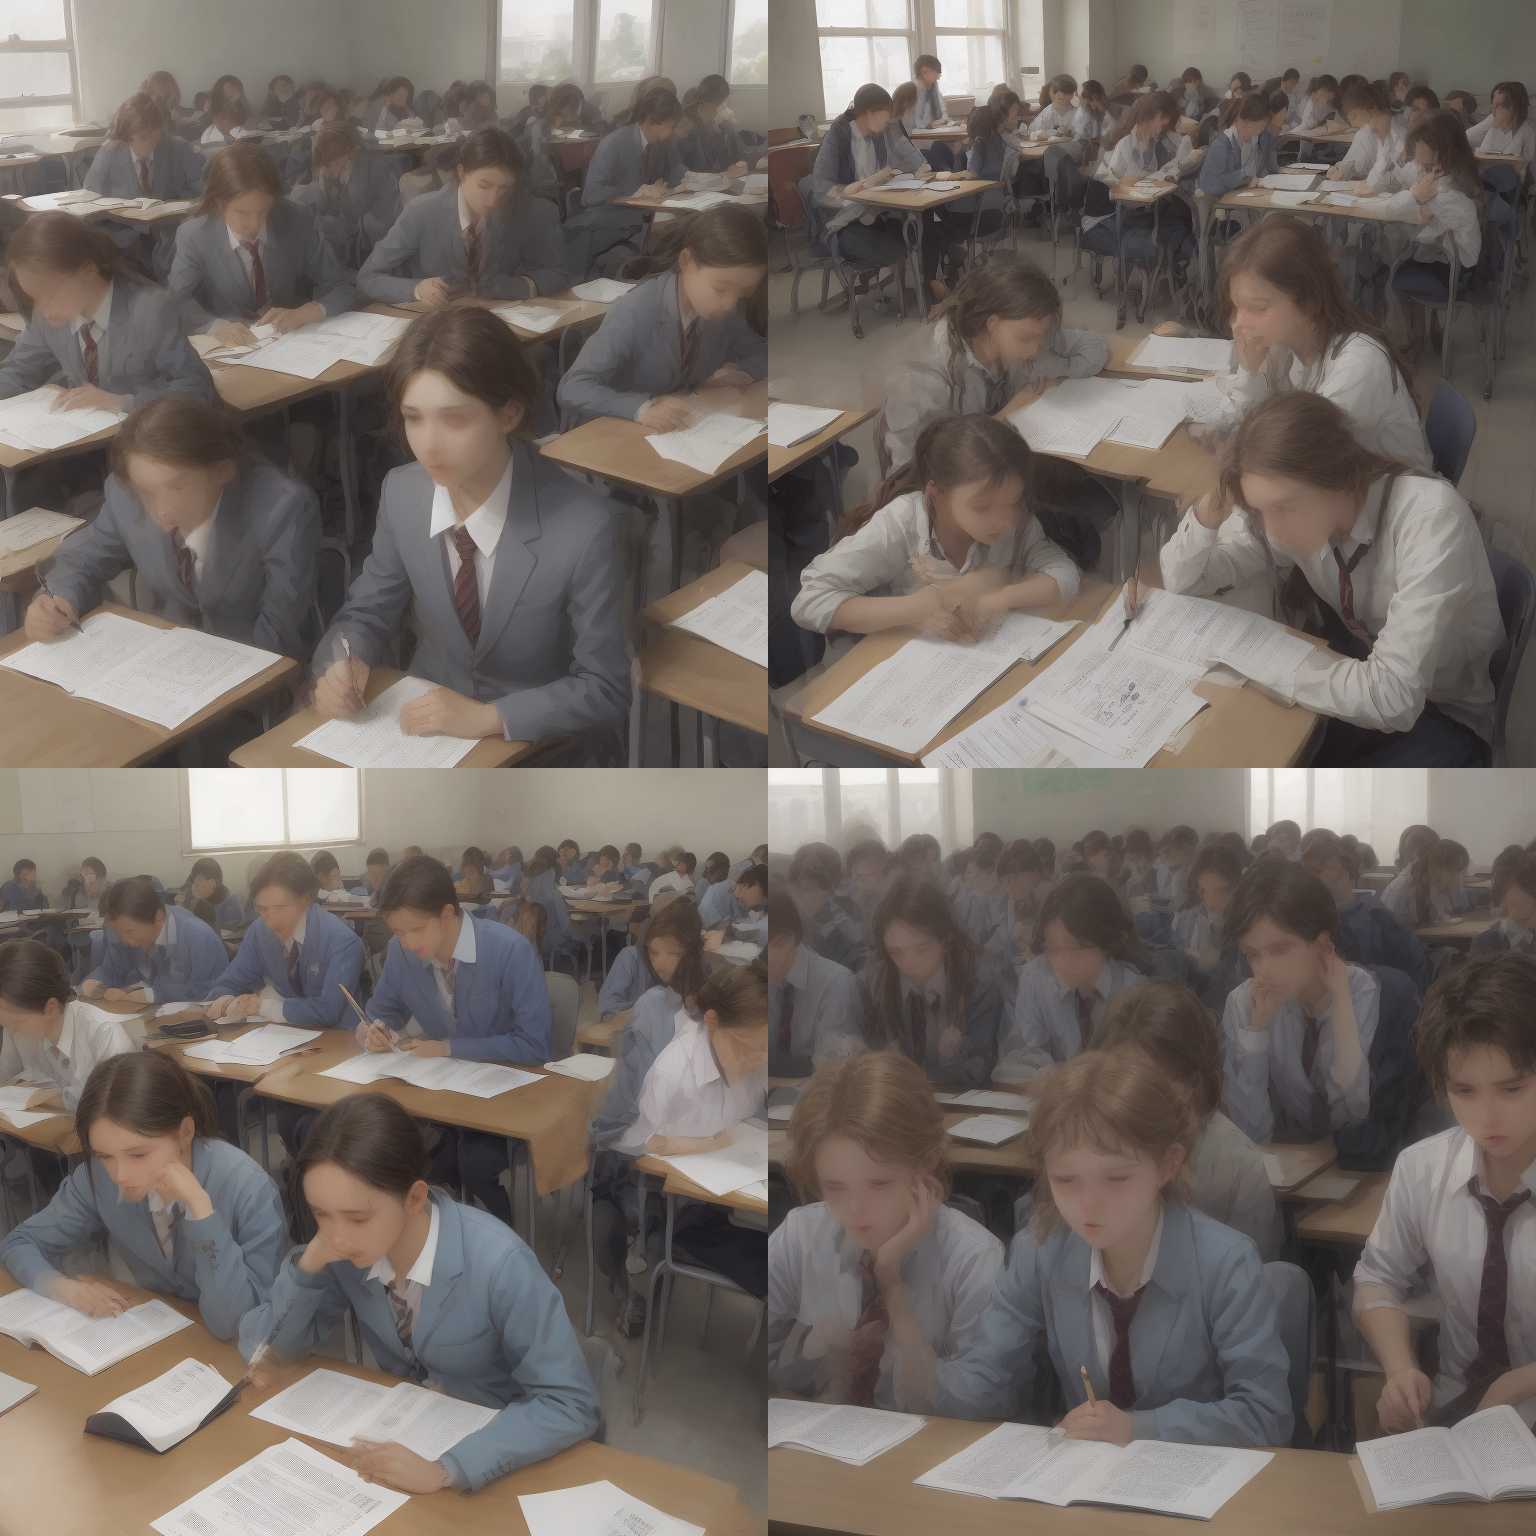 Students during an exam